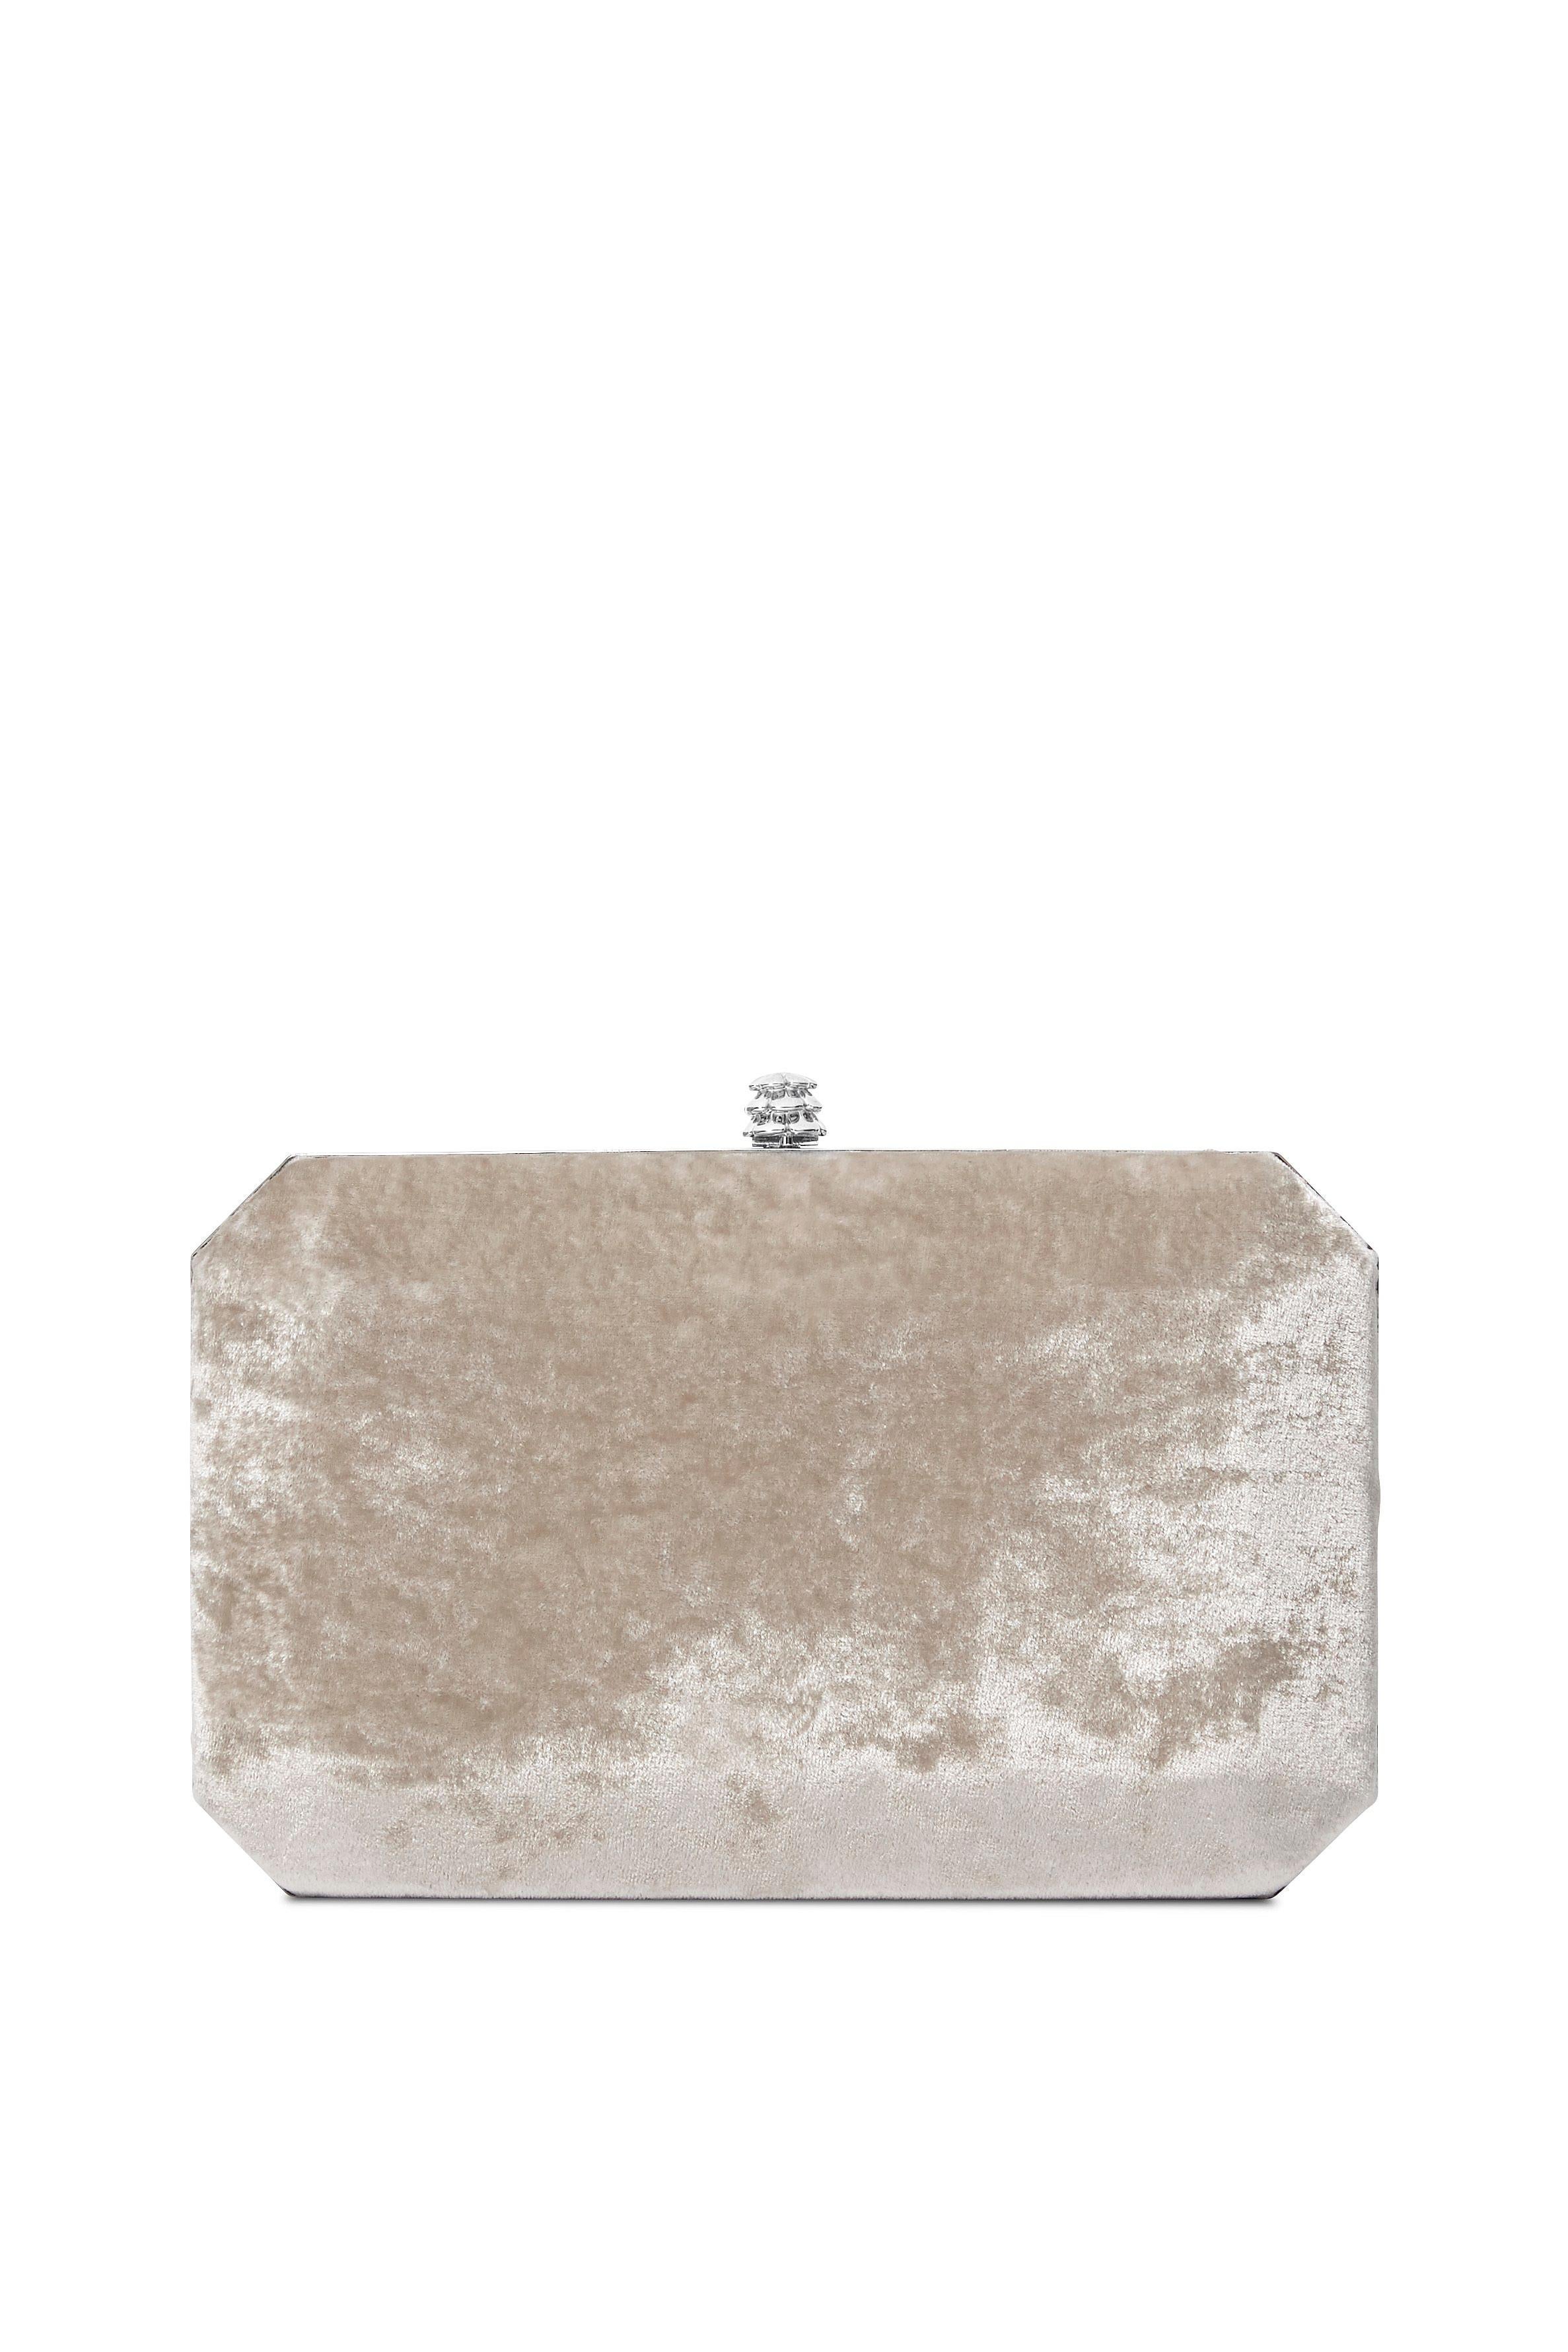 The Lily is featured in our Platinum crushed velvet with silver hardware. It is a hard-framed rectangular clutch designed with interior pockets and an optional silver cross-body chain. It fits the large iPhone and features our signature Pinecone